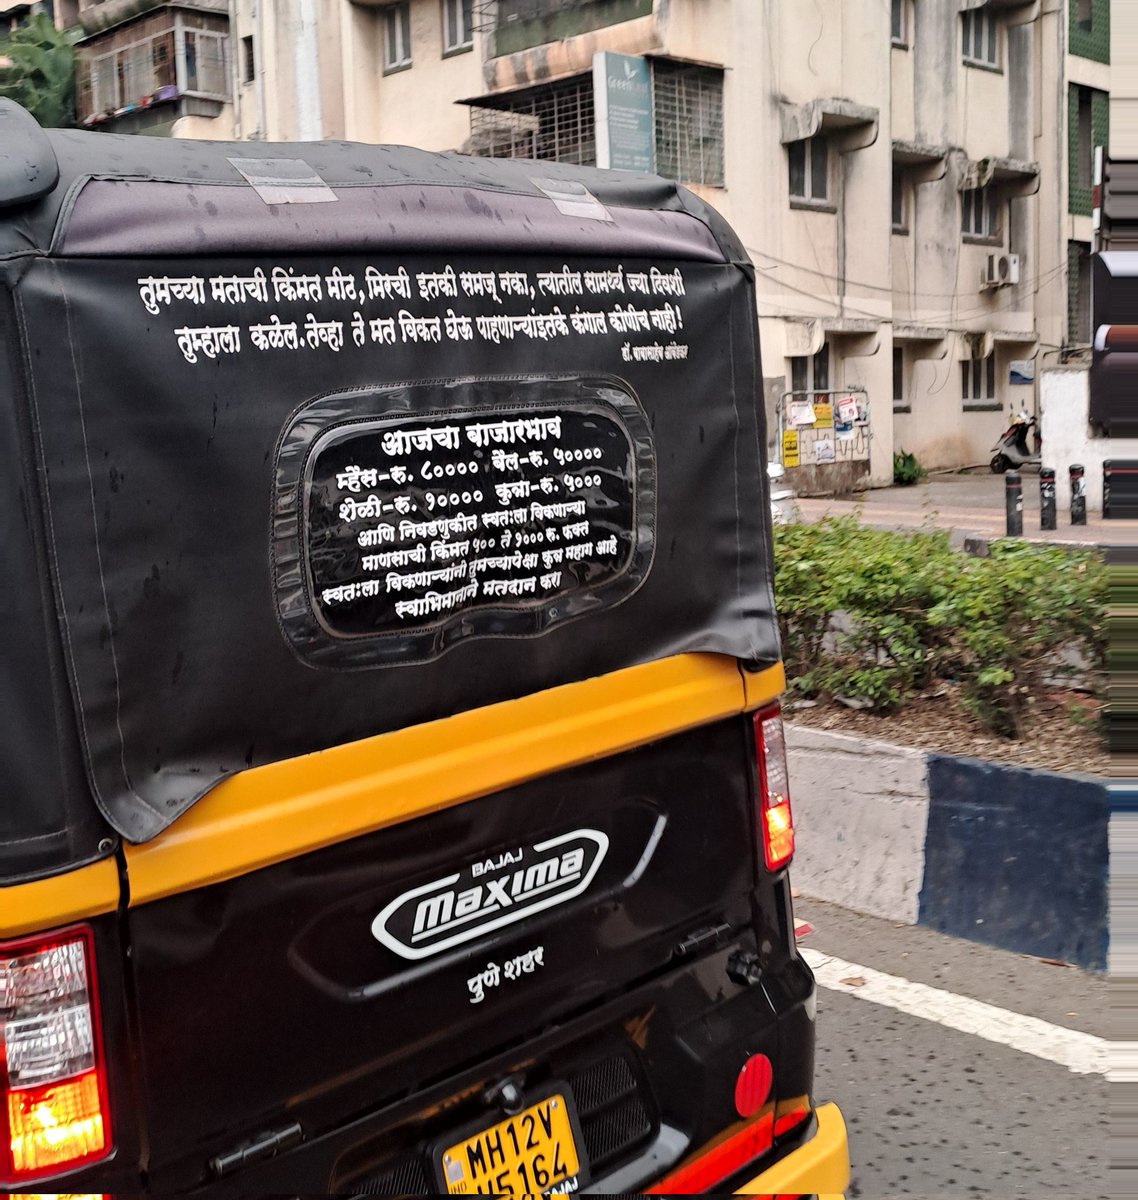 One of our Ambedkarite Activist's auto in Pune.